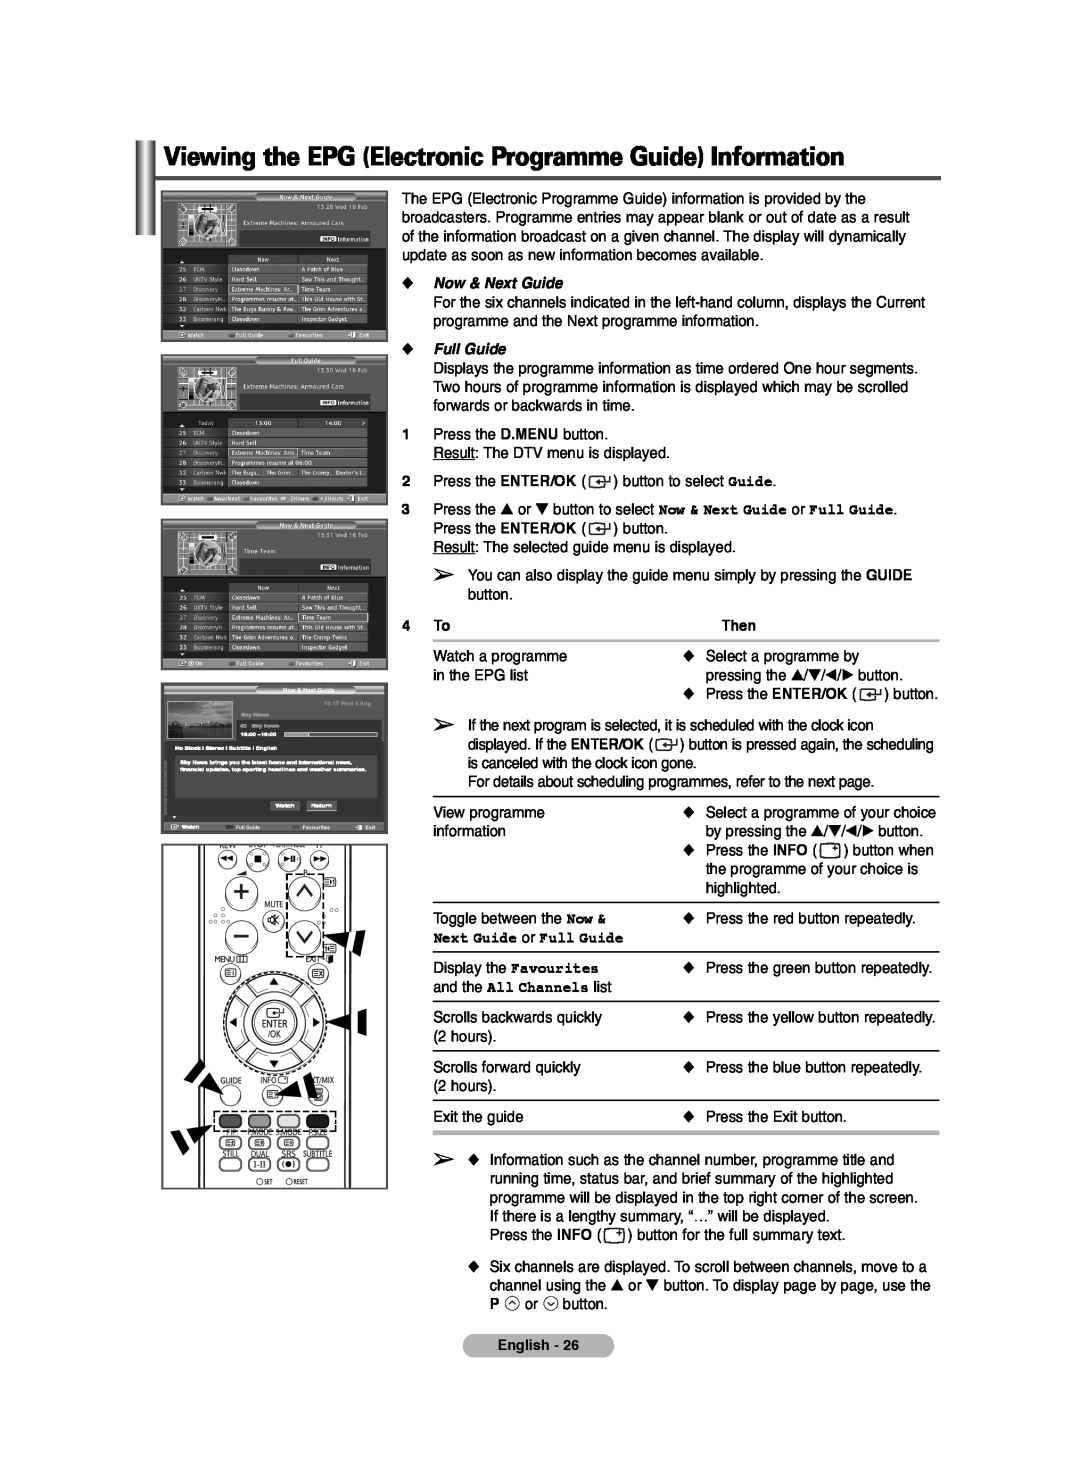 Samsung PS-42E71HD, PS-42E7HD manual Viewing the EPG Electronic Programme Guide Information, Now & Next Guide, Full Guide 